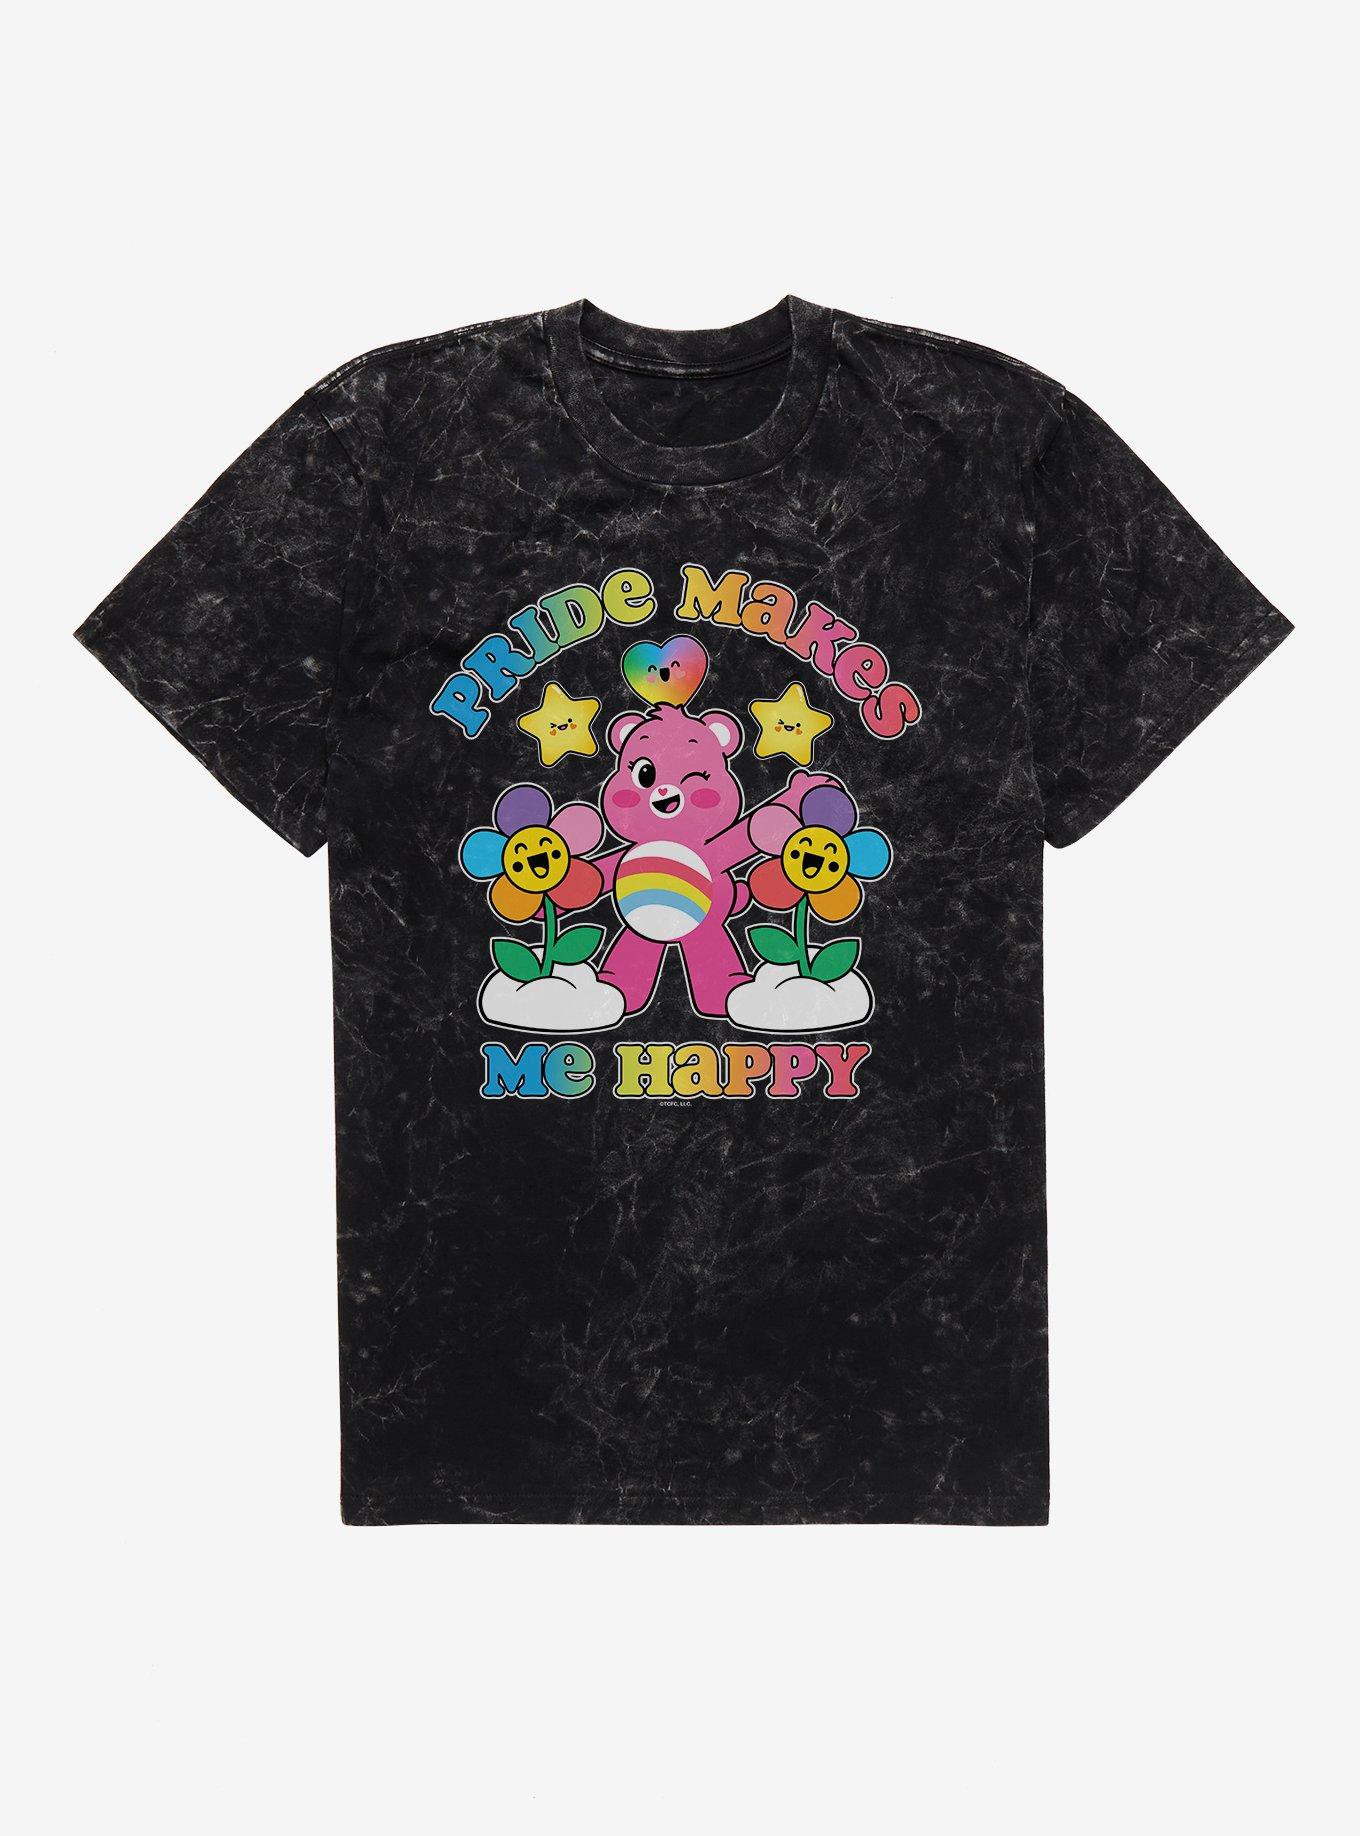 Care Bears Pride Makes Me Happy Mineral Wash T-Shirt